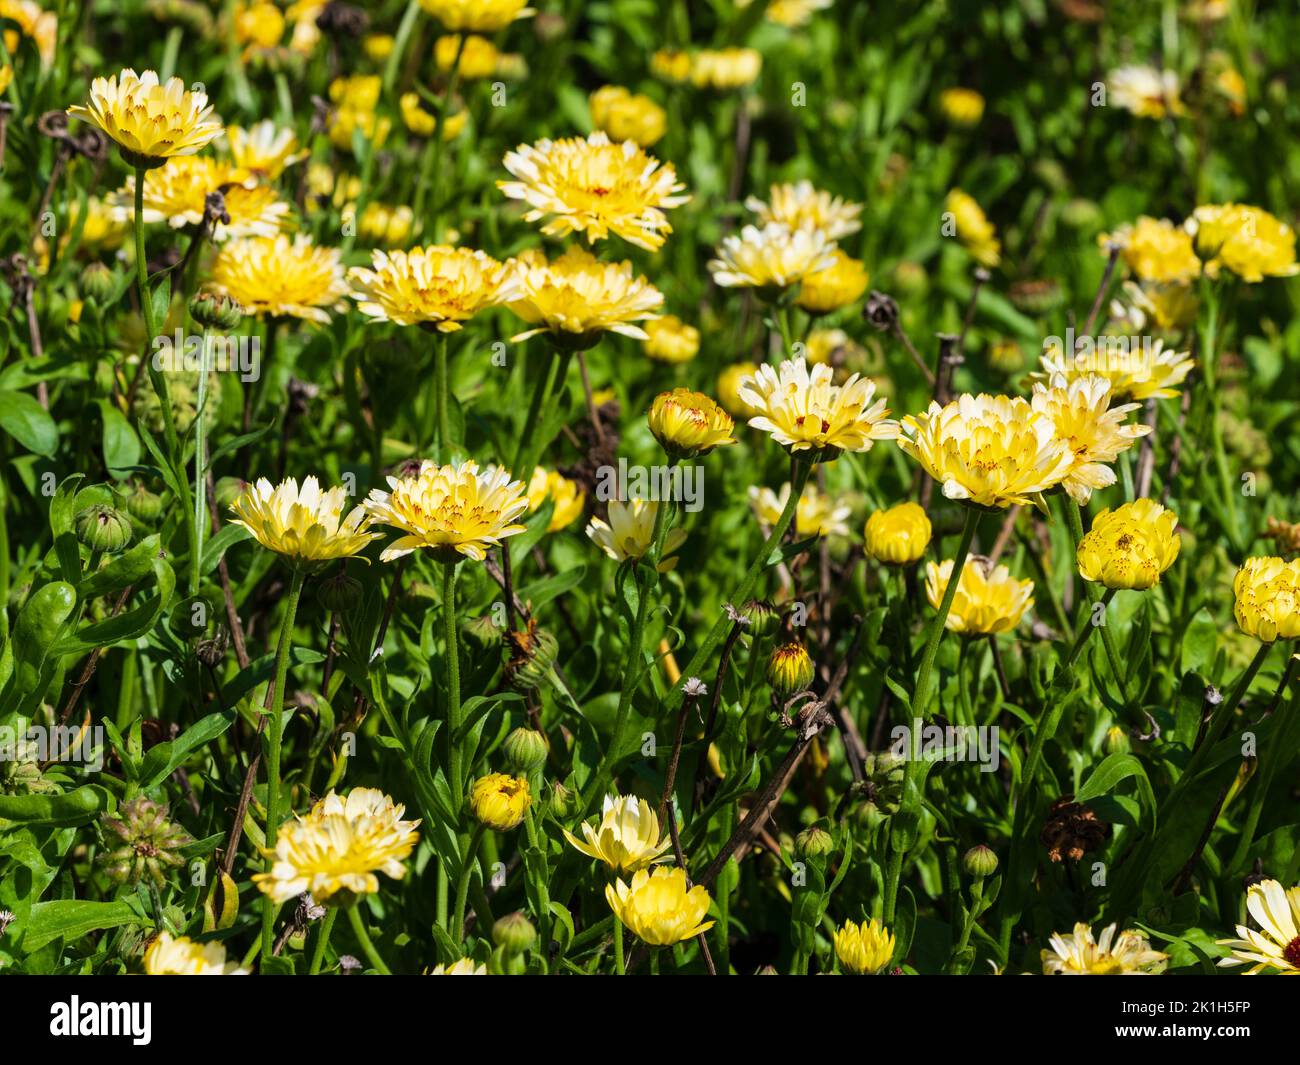 Yellow and white double flowers of the hardy annual pot marigold, Calendula officinalis 'Snow Princess' Stock Photo